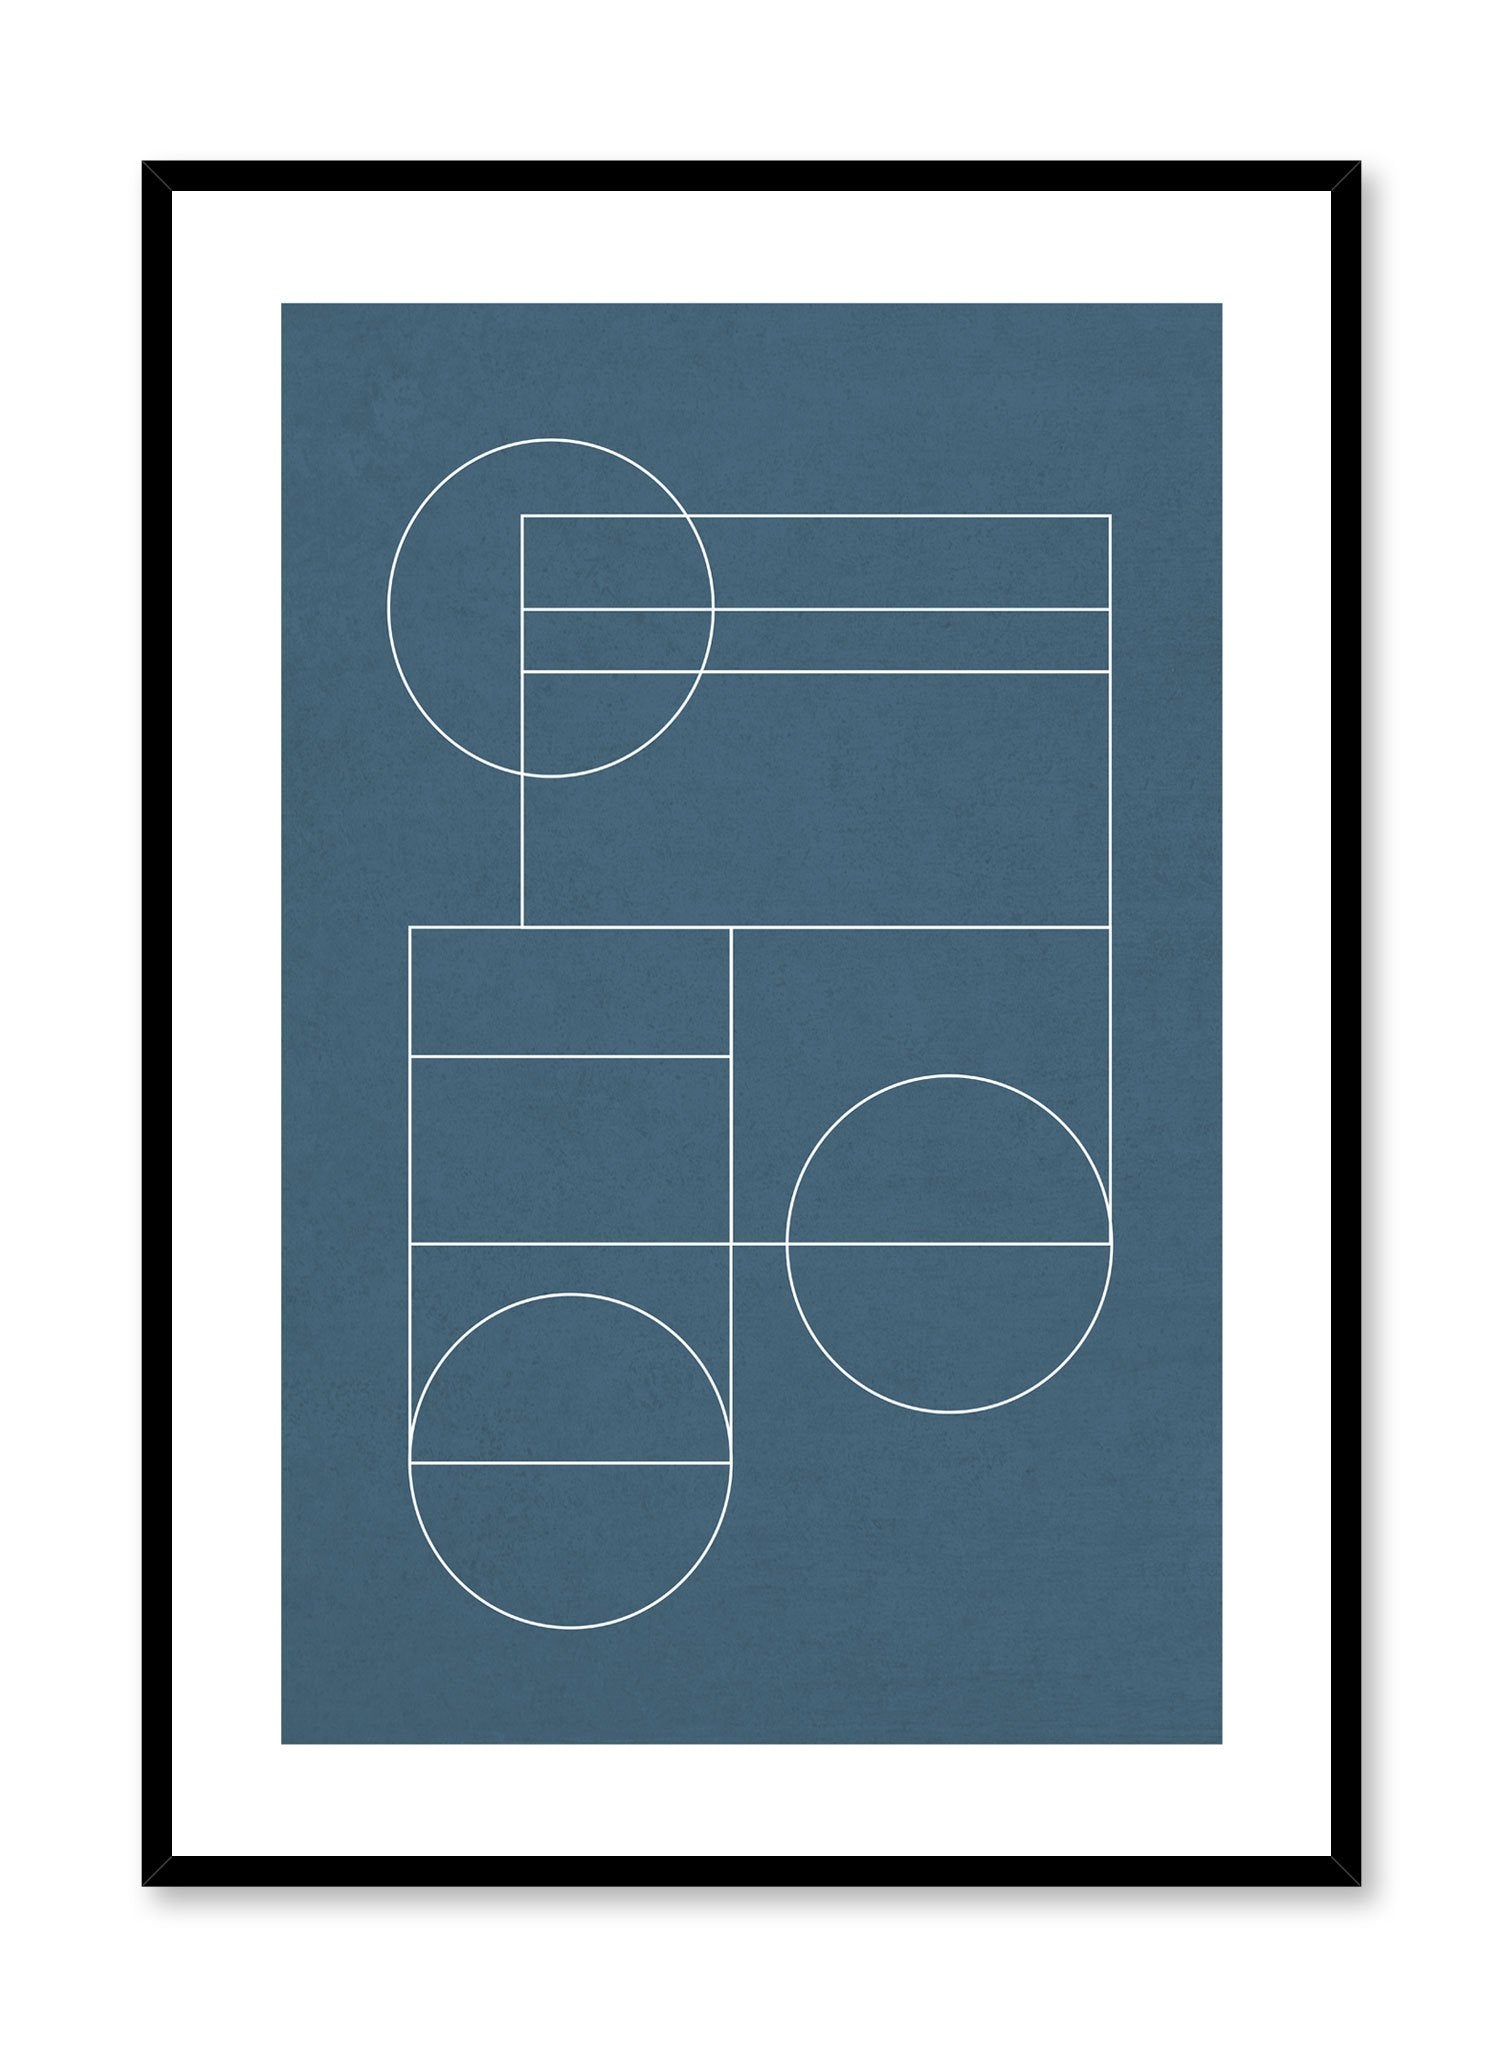 Modern minimalist poster by Opposite Wall with abstract design of Blueprint by Toffie Affichiste